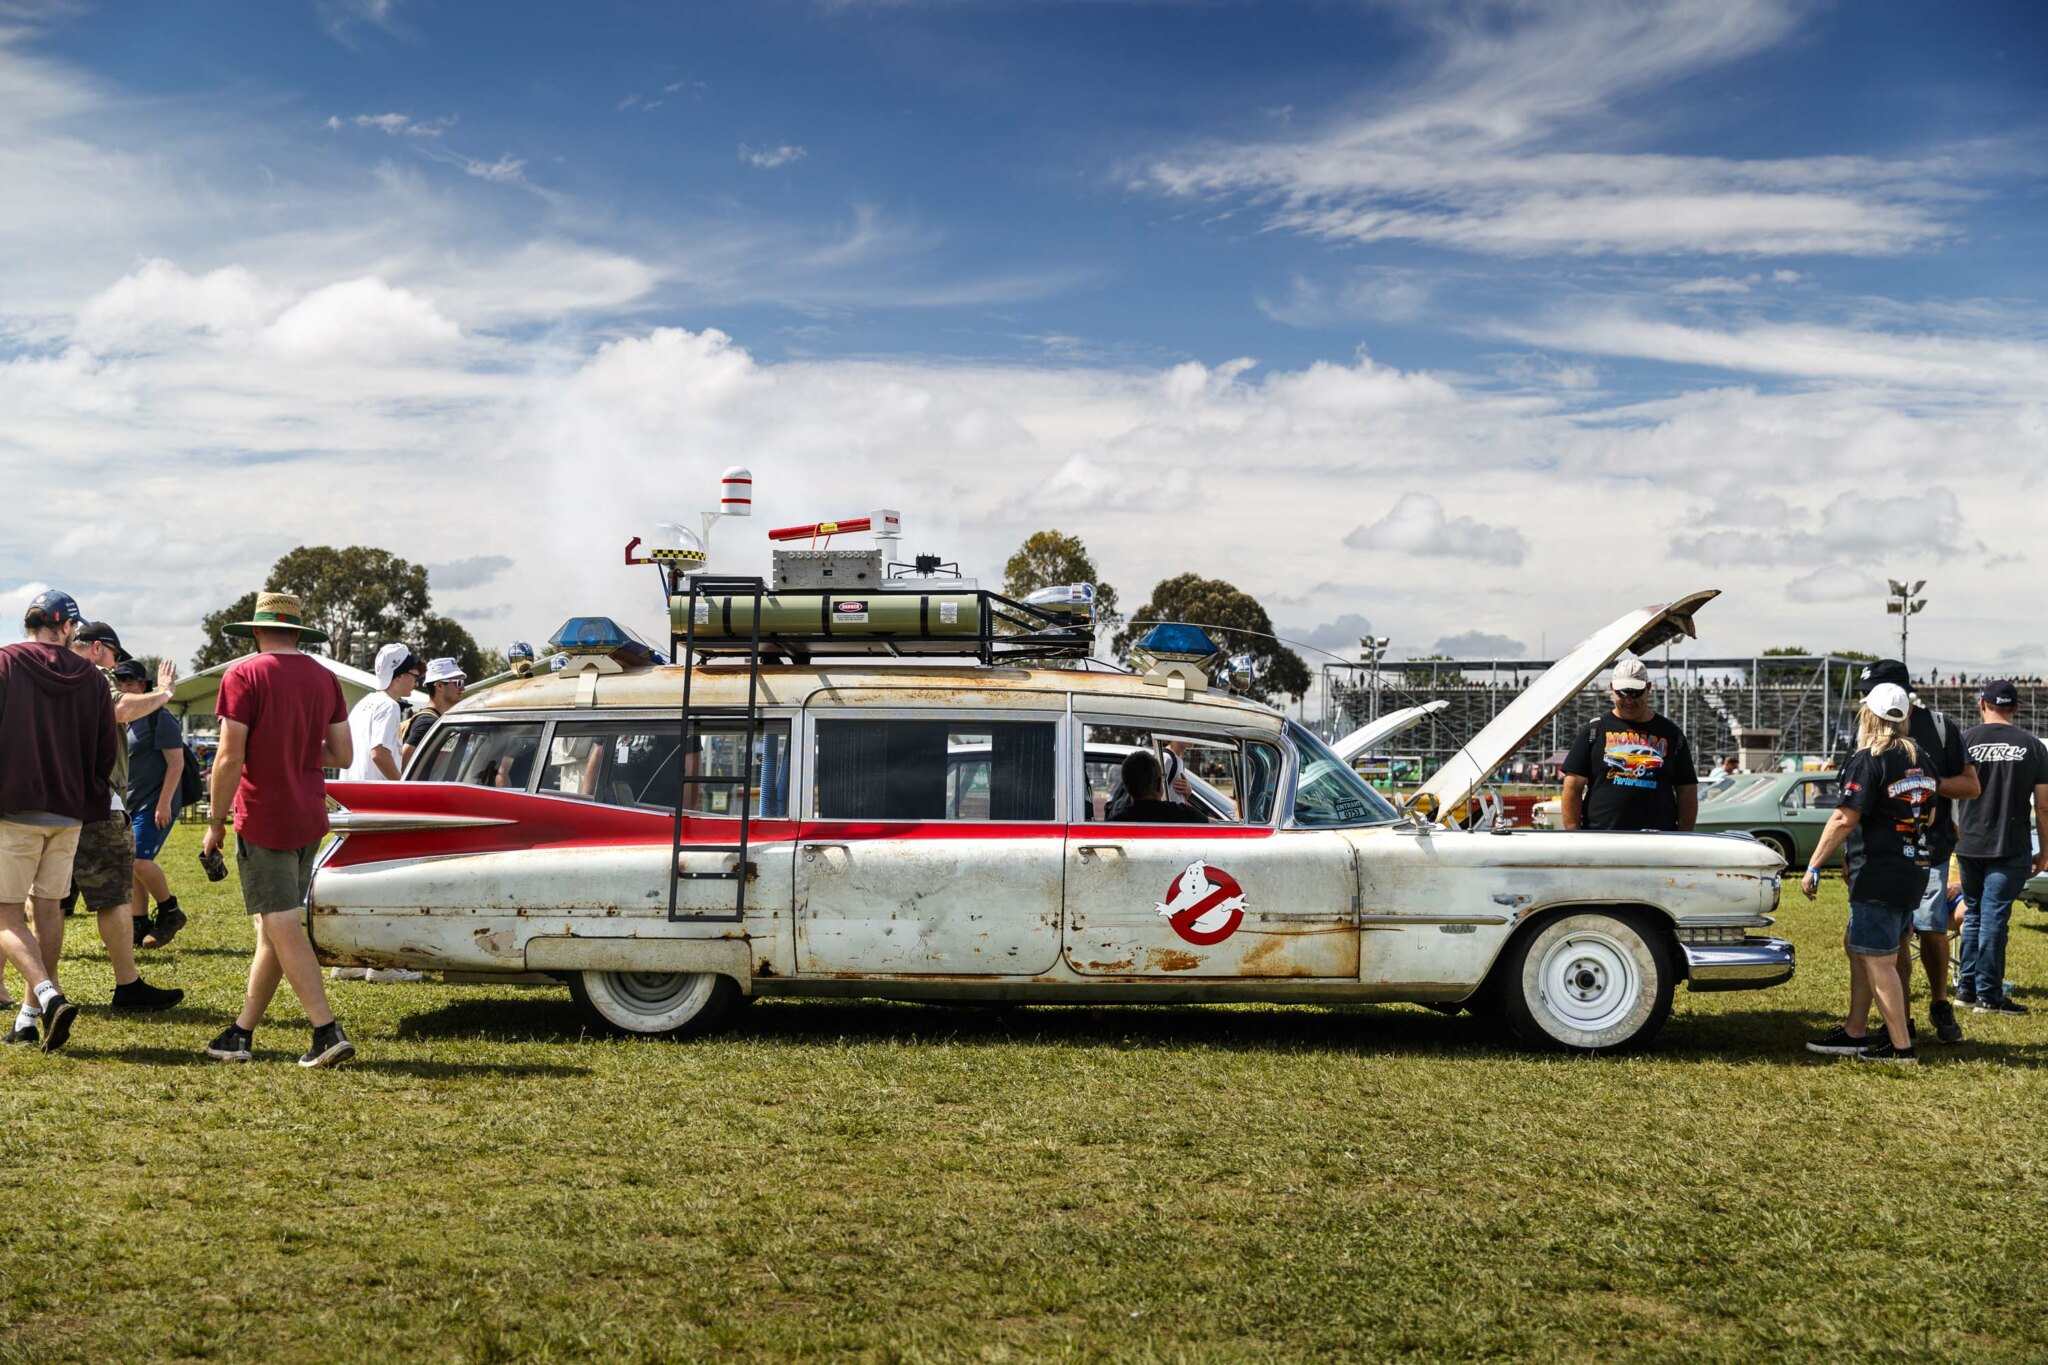 Blown LS3-powered Ghostbusters ECTO-1 replica!